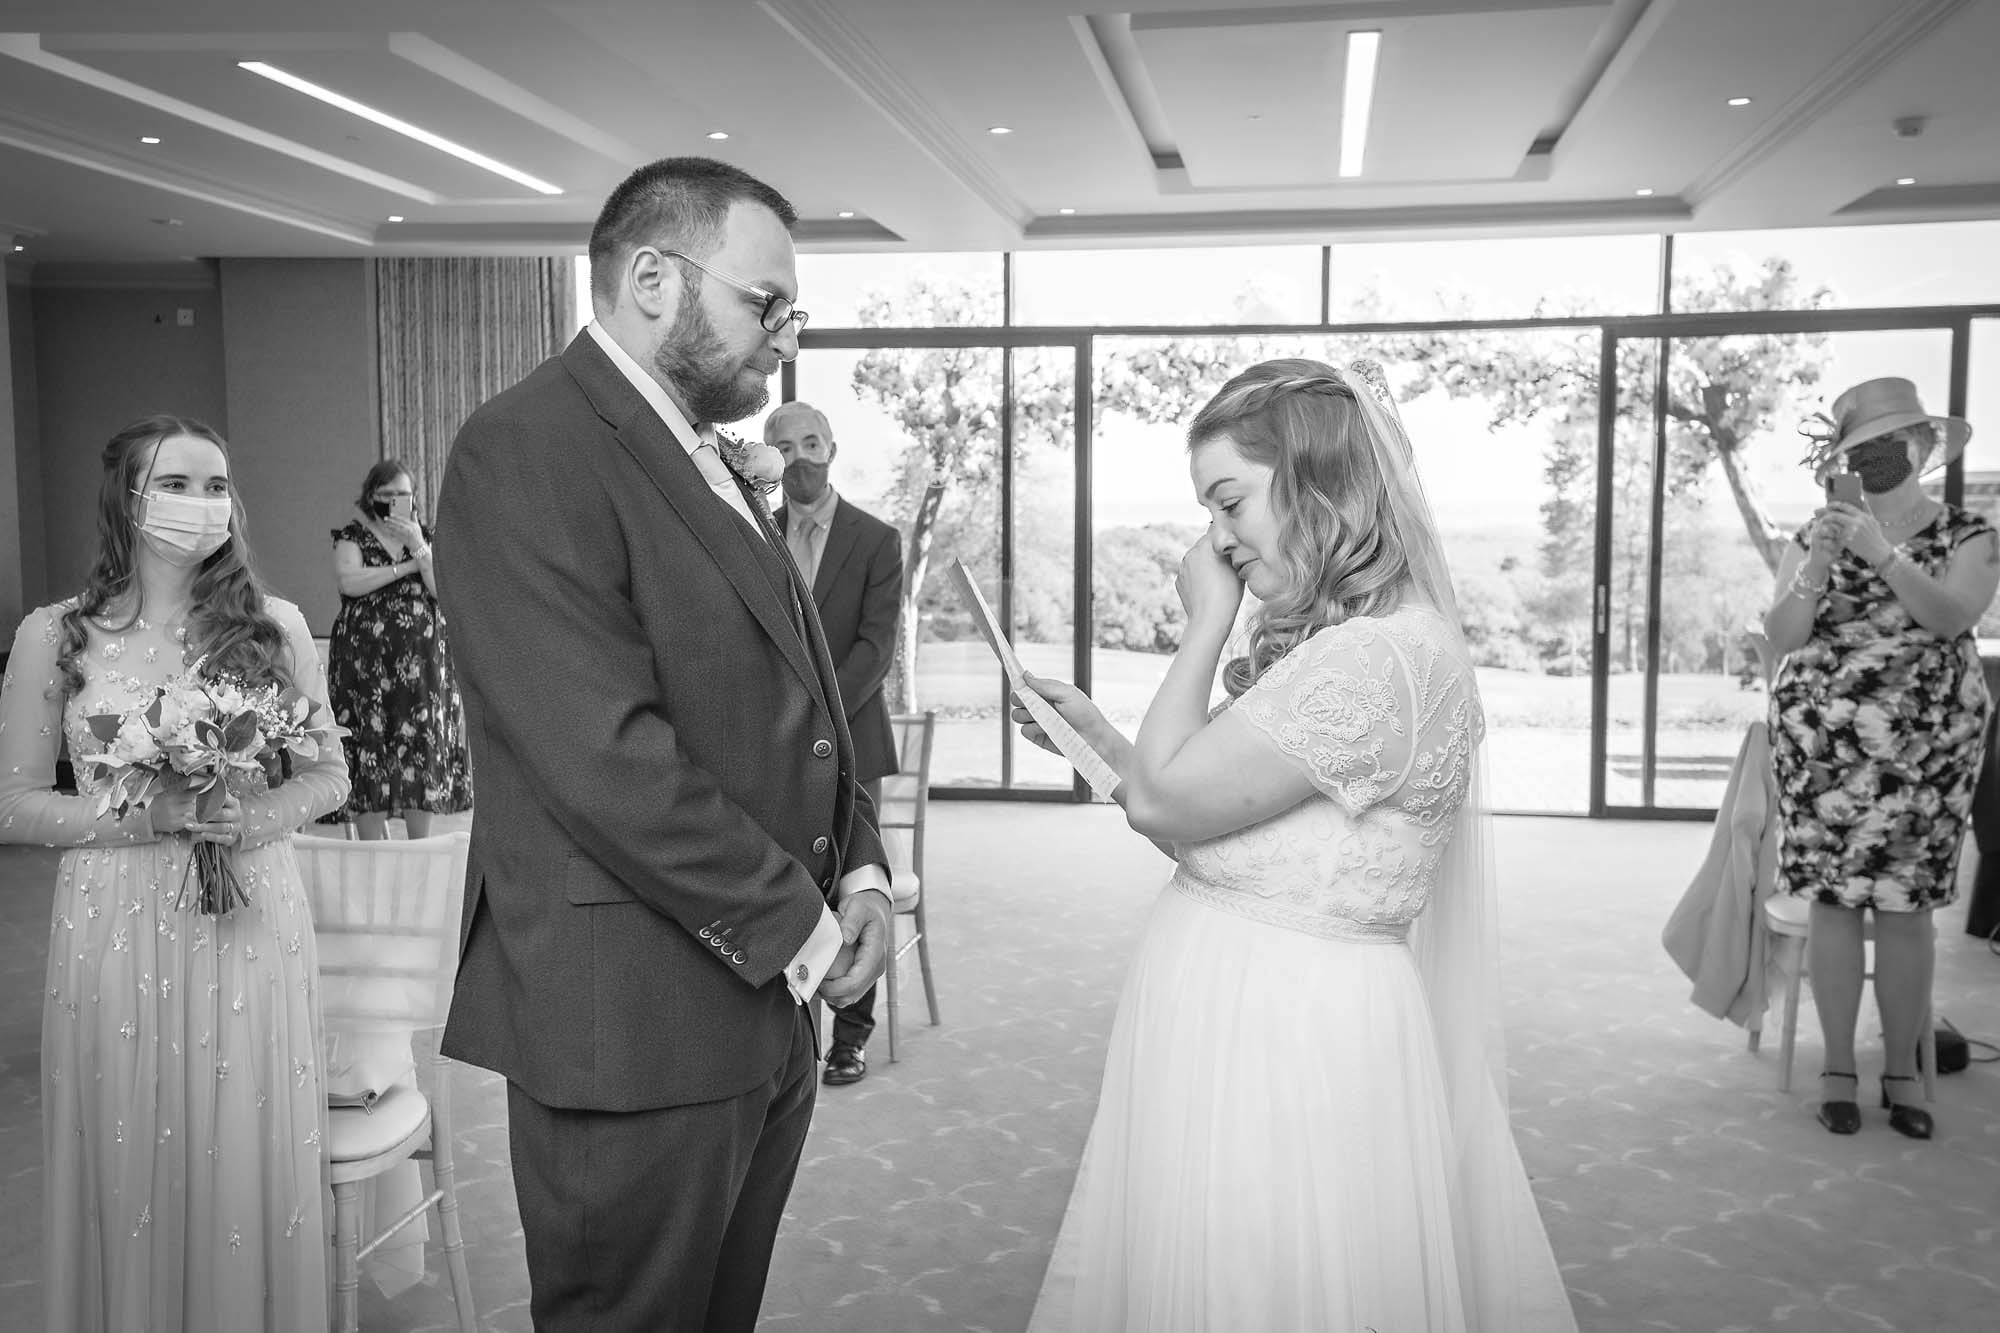 The bride is tearful as she reads to her groom at a Newport wedding